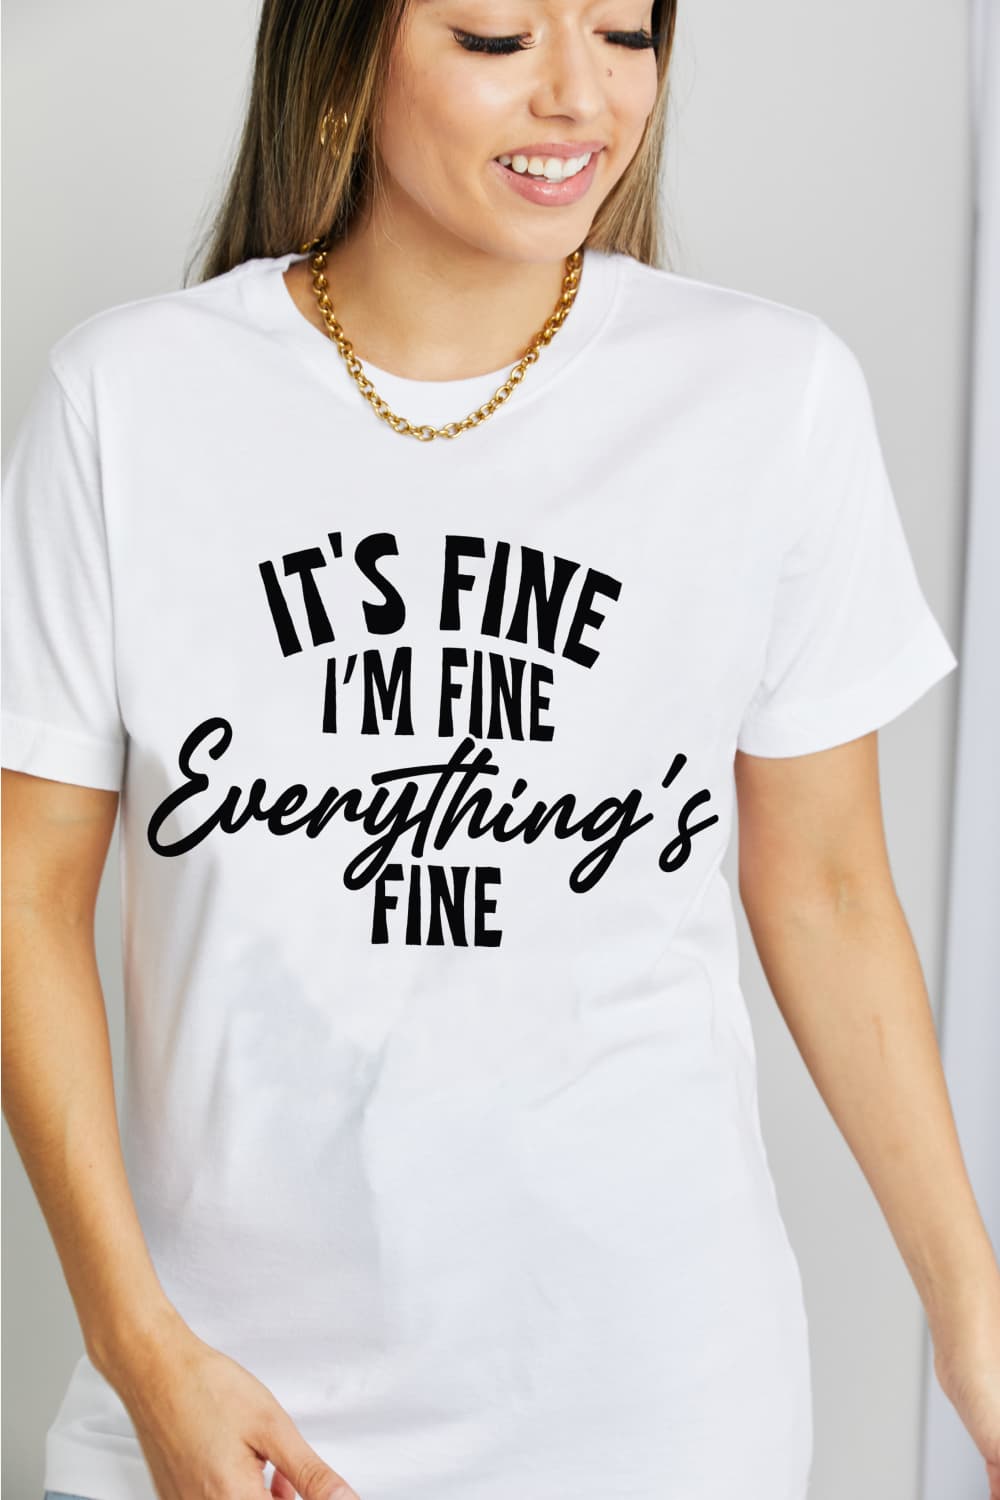 Simply Love Simply Love Full Size IT'S FINE I'M FINE EVERYTHING'S FINE Graphic Cotton T-Shirt